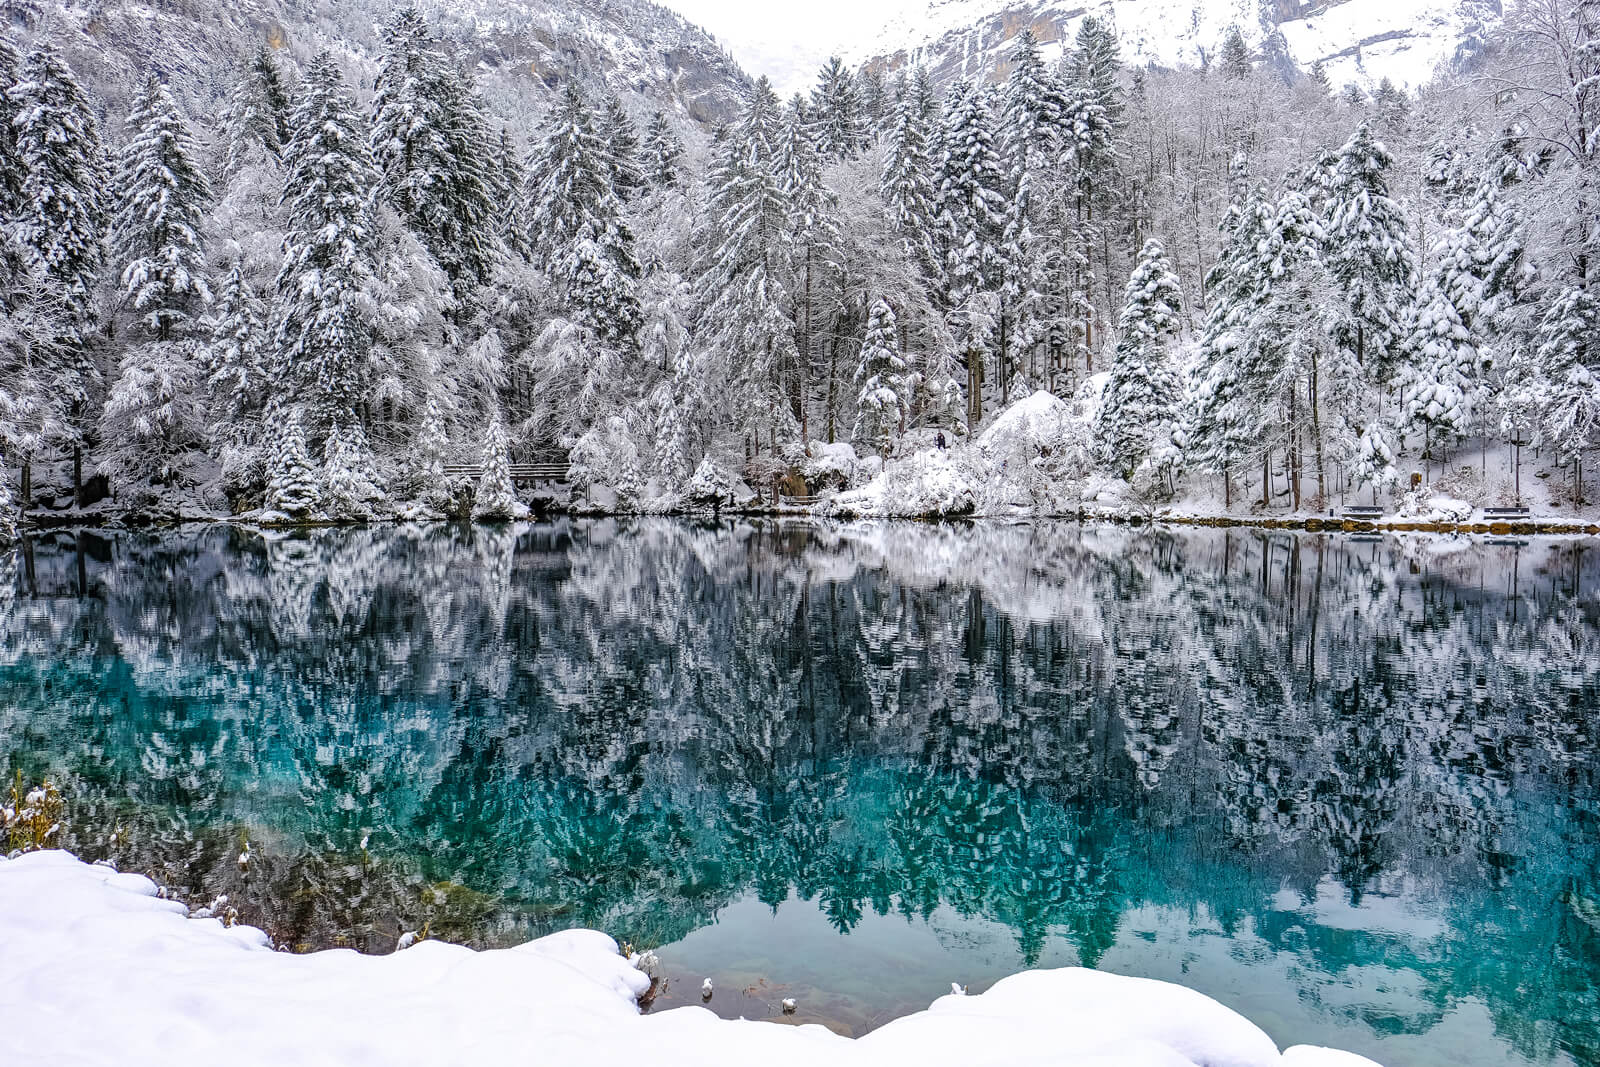 See why Lake Blausee is stunning during all seasons